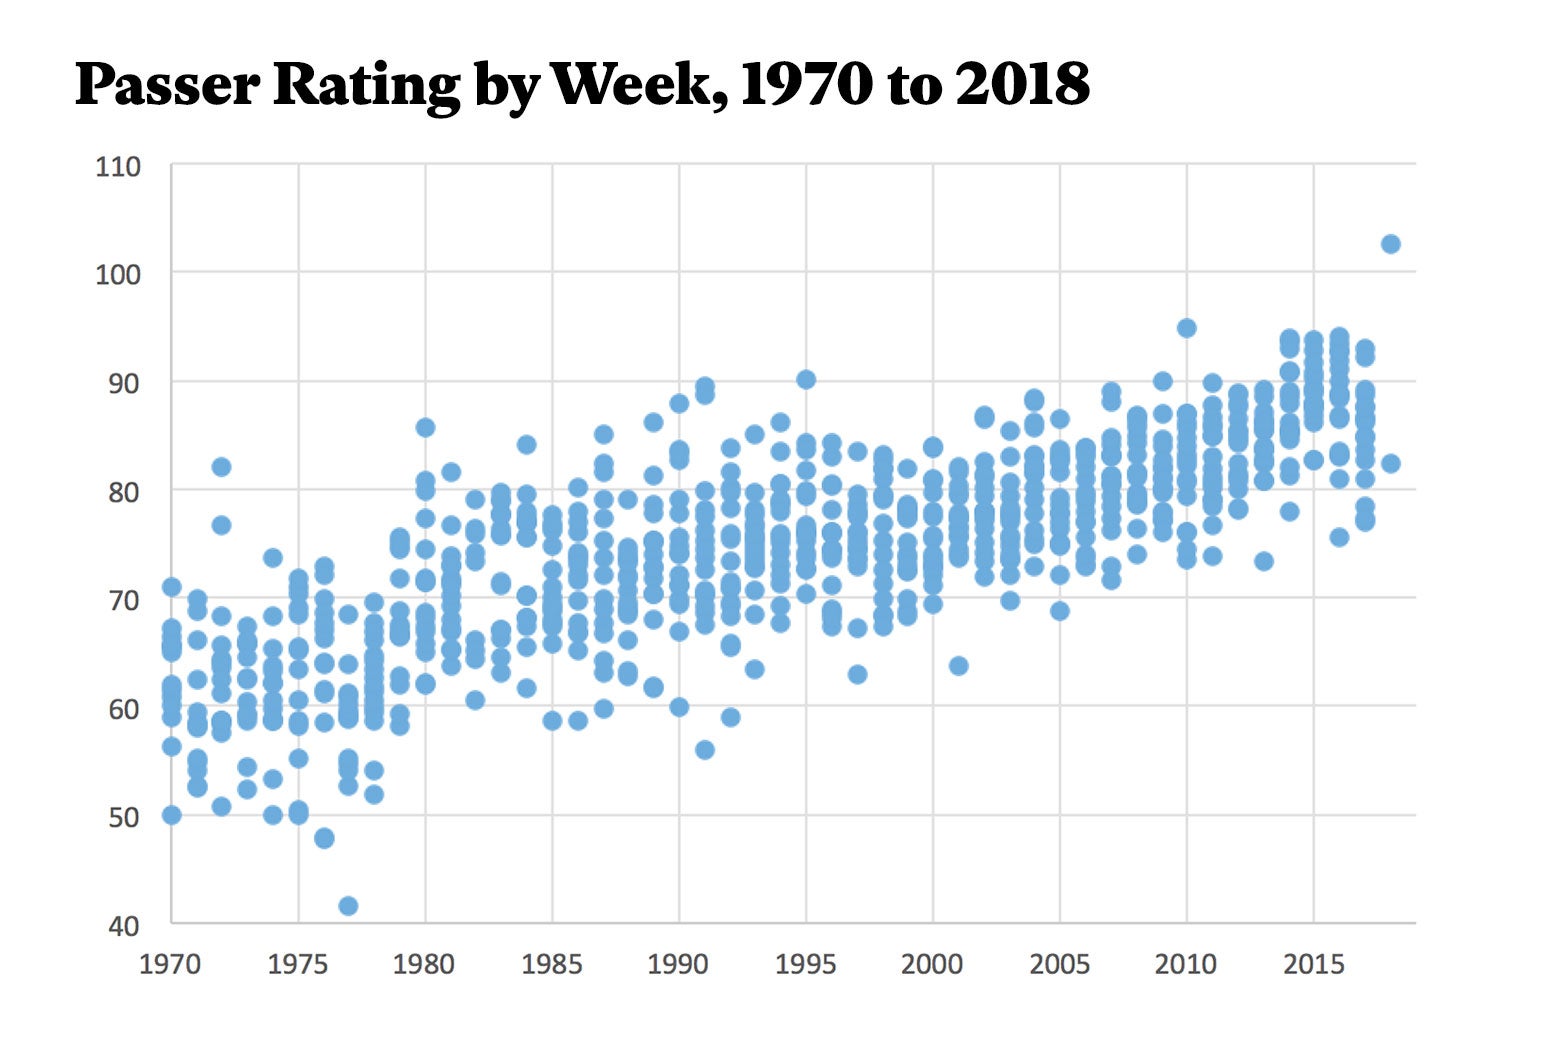 Chart of passer ratings by week, 1970-2018.